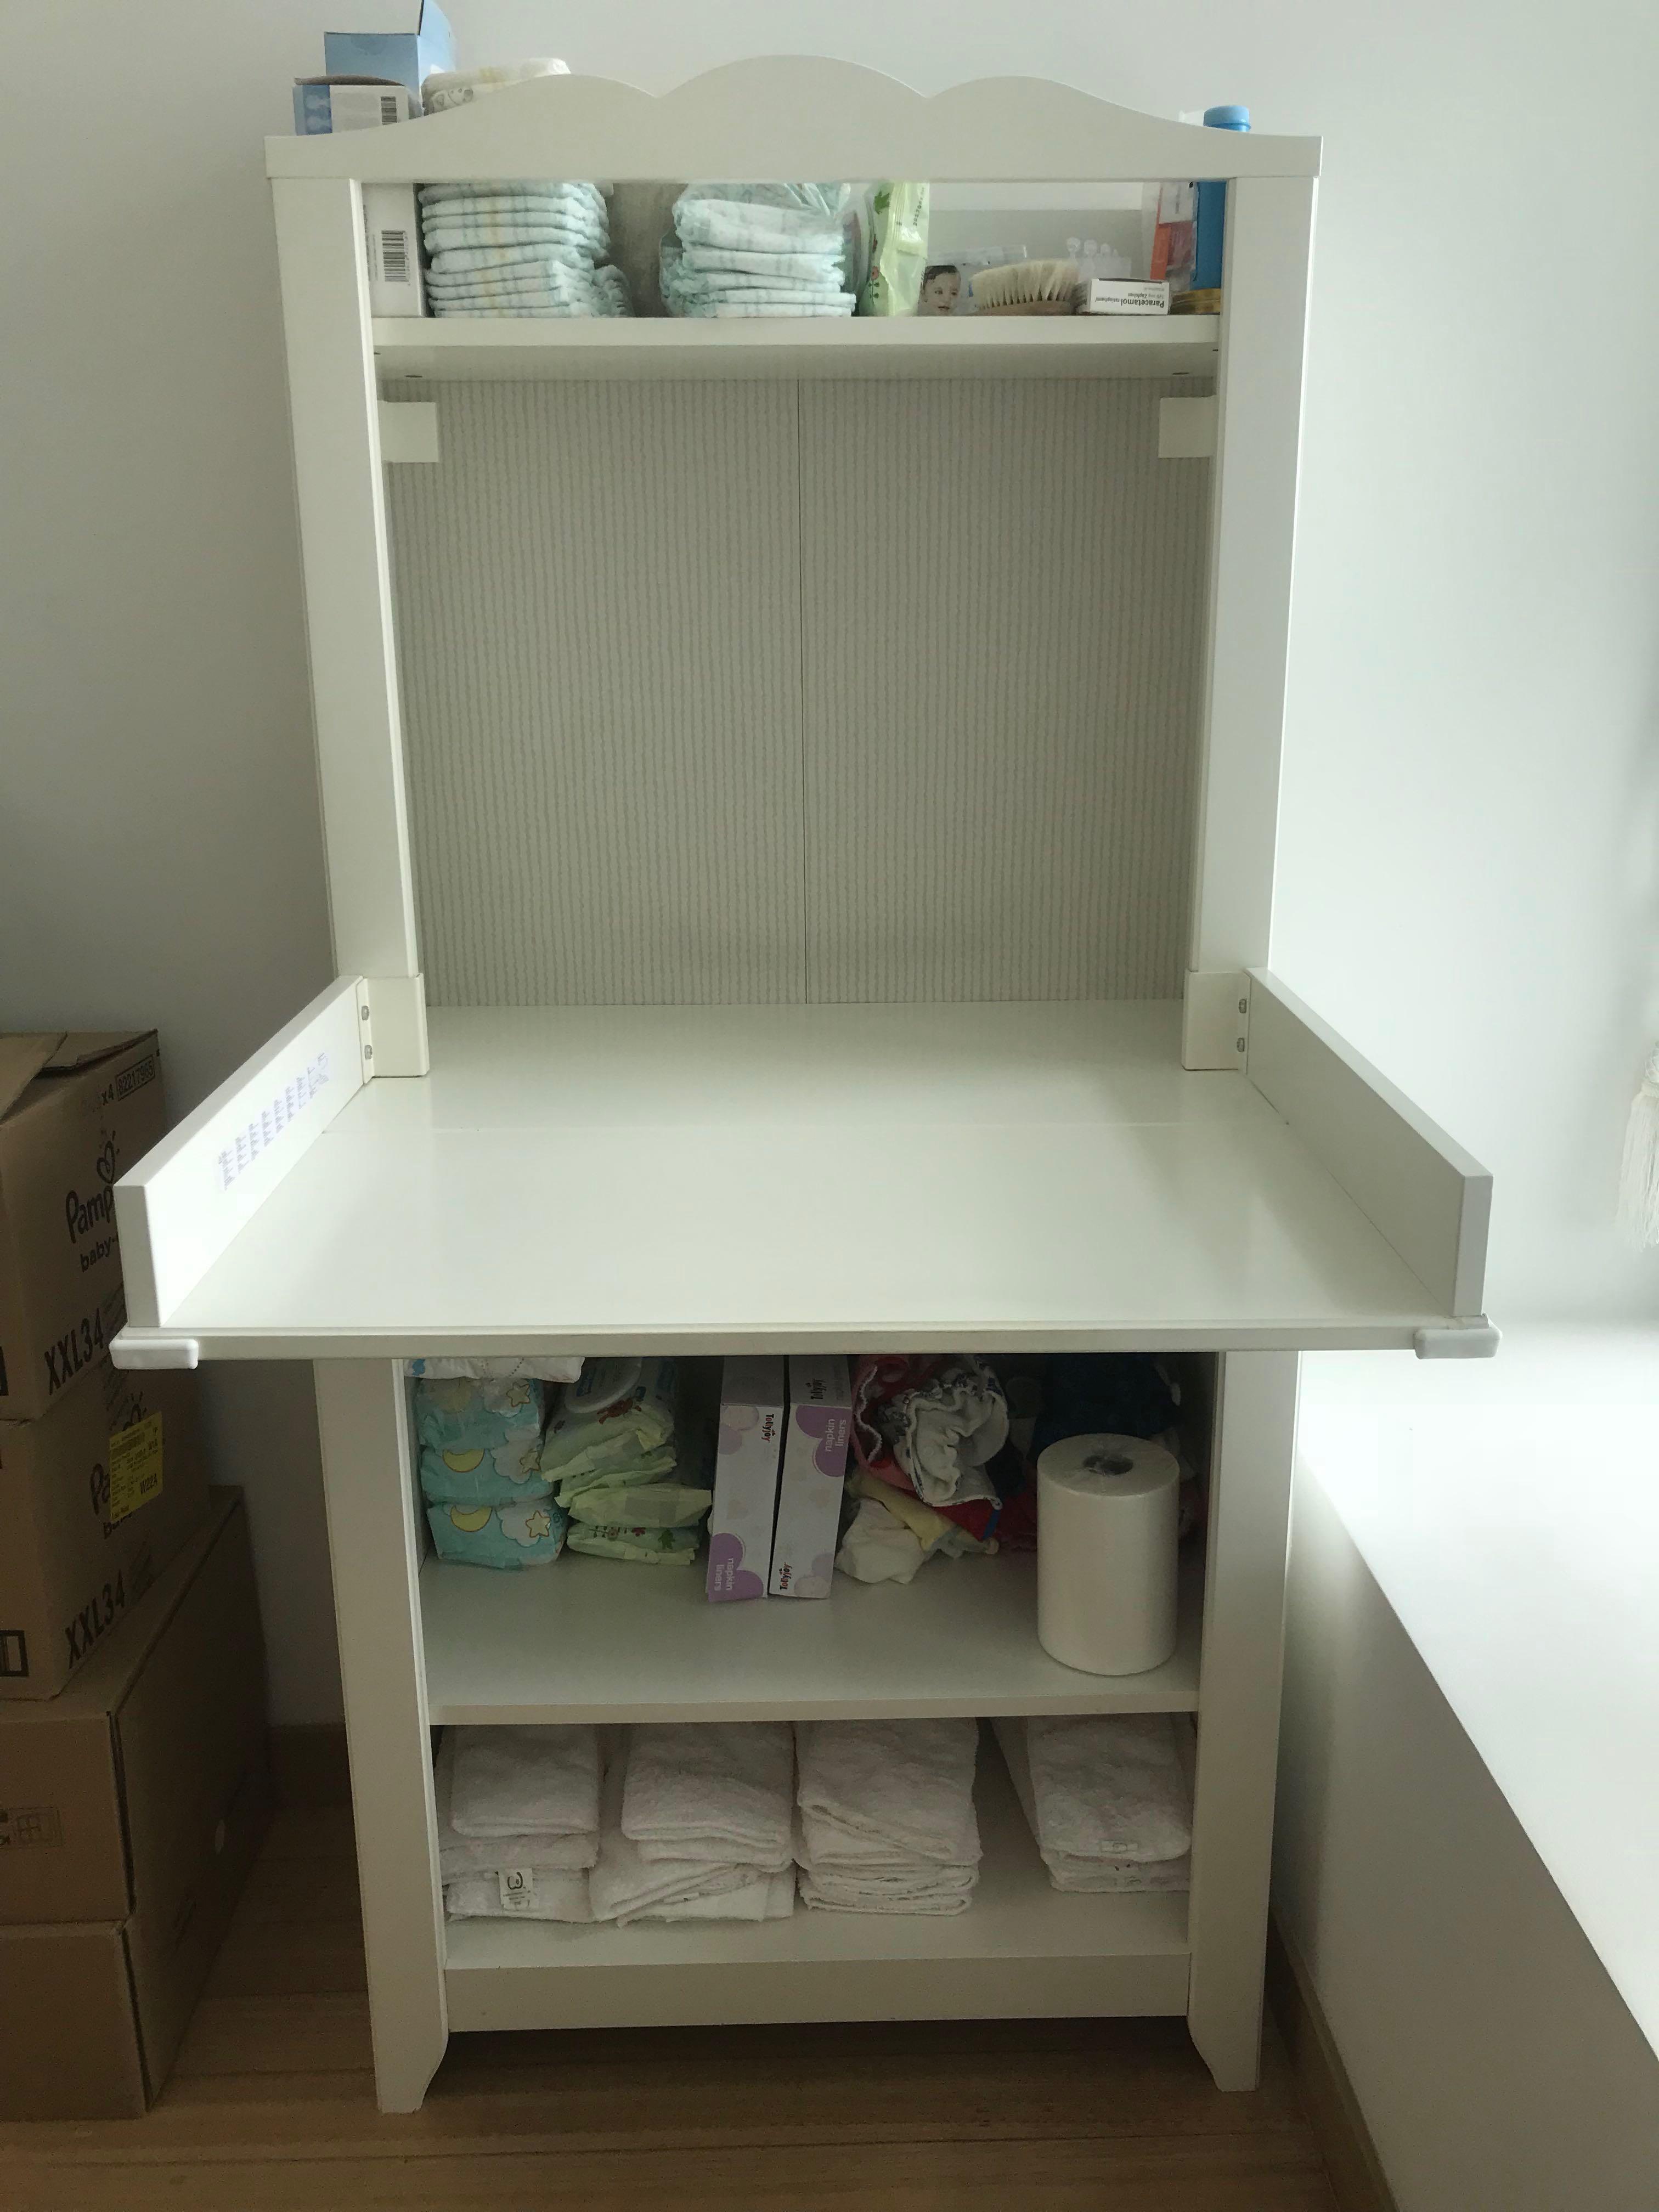 Ikea Bookshelf And Changing Table Babies Kids Cots Cribs On